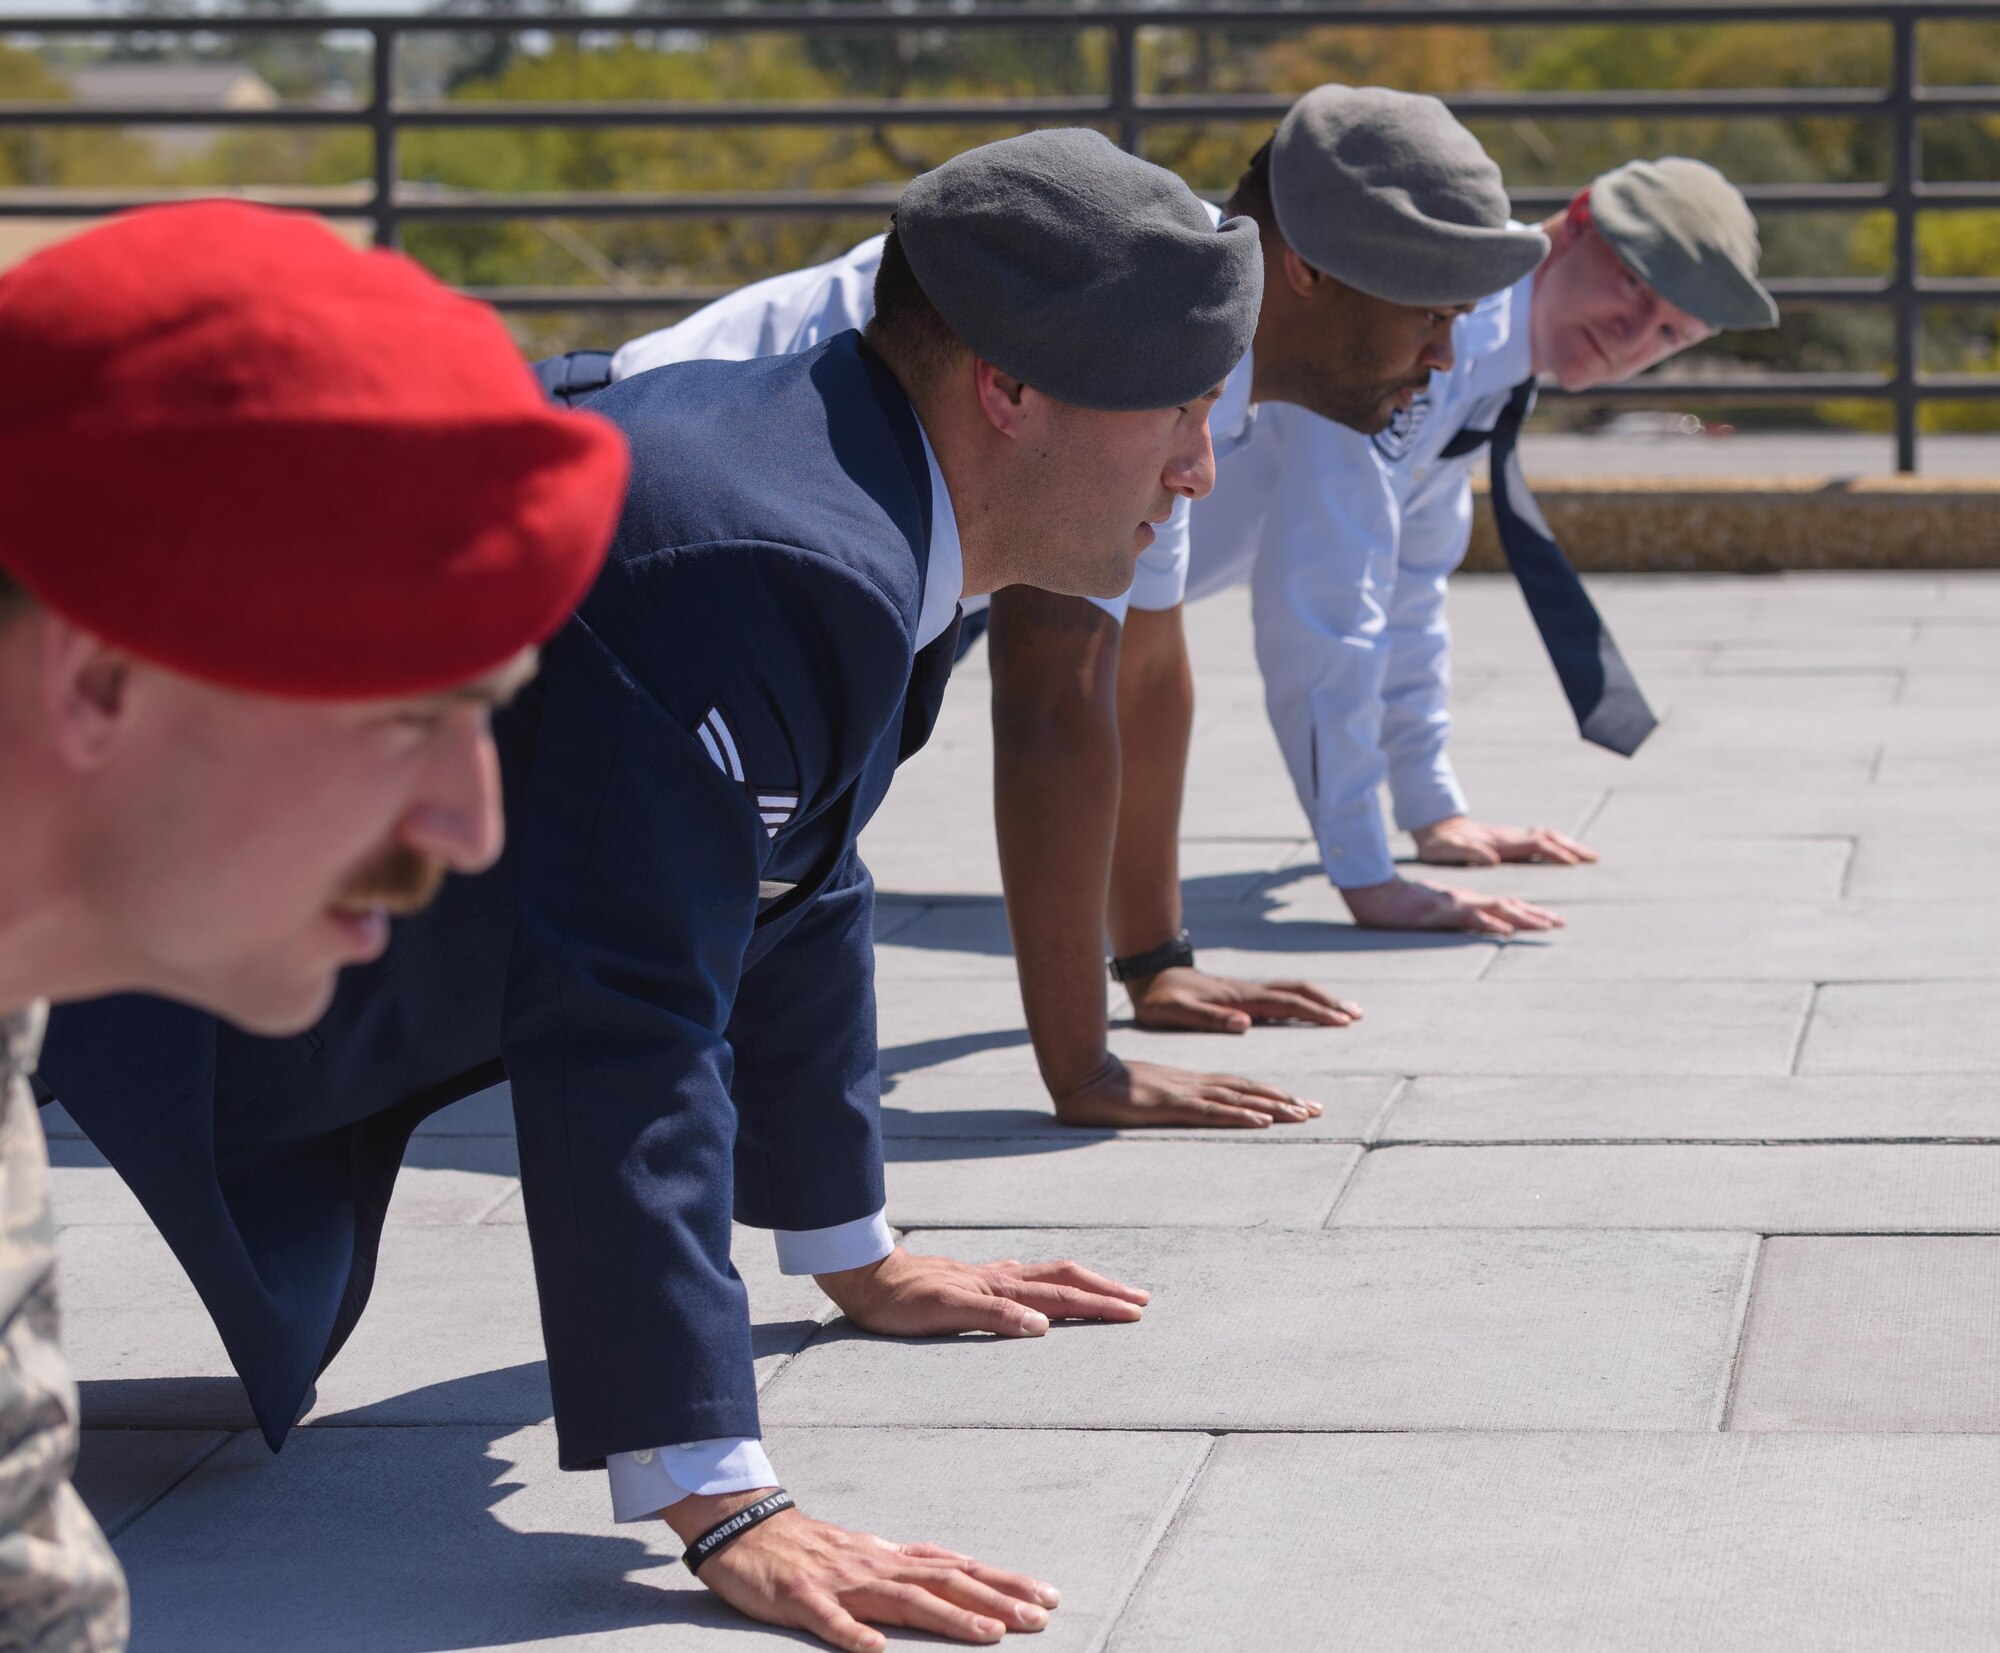 Senior Airman Matthew James, 335th Training Squadron student, leads graduates and guest in Memorial Pushups during a Special Operations Weather Apprentice Course graduation ceremony at the Weather Training Complex, March 22, 2017, on Keesler Air Force Base, Miss. At his graduation James received his Gray Beret. (U.S. Air Force photo by Andre’ Askew) 